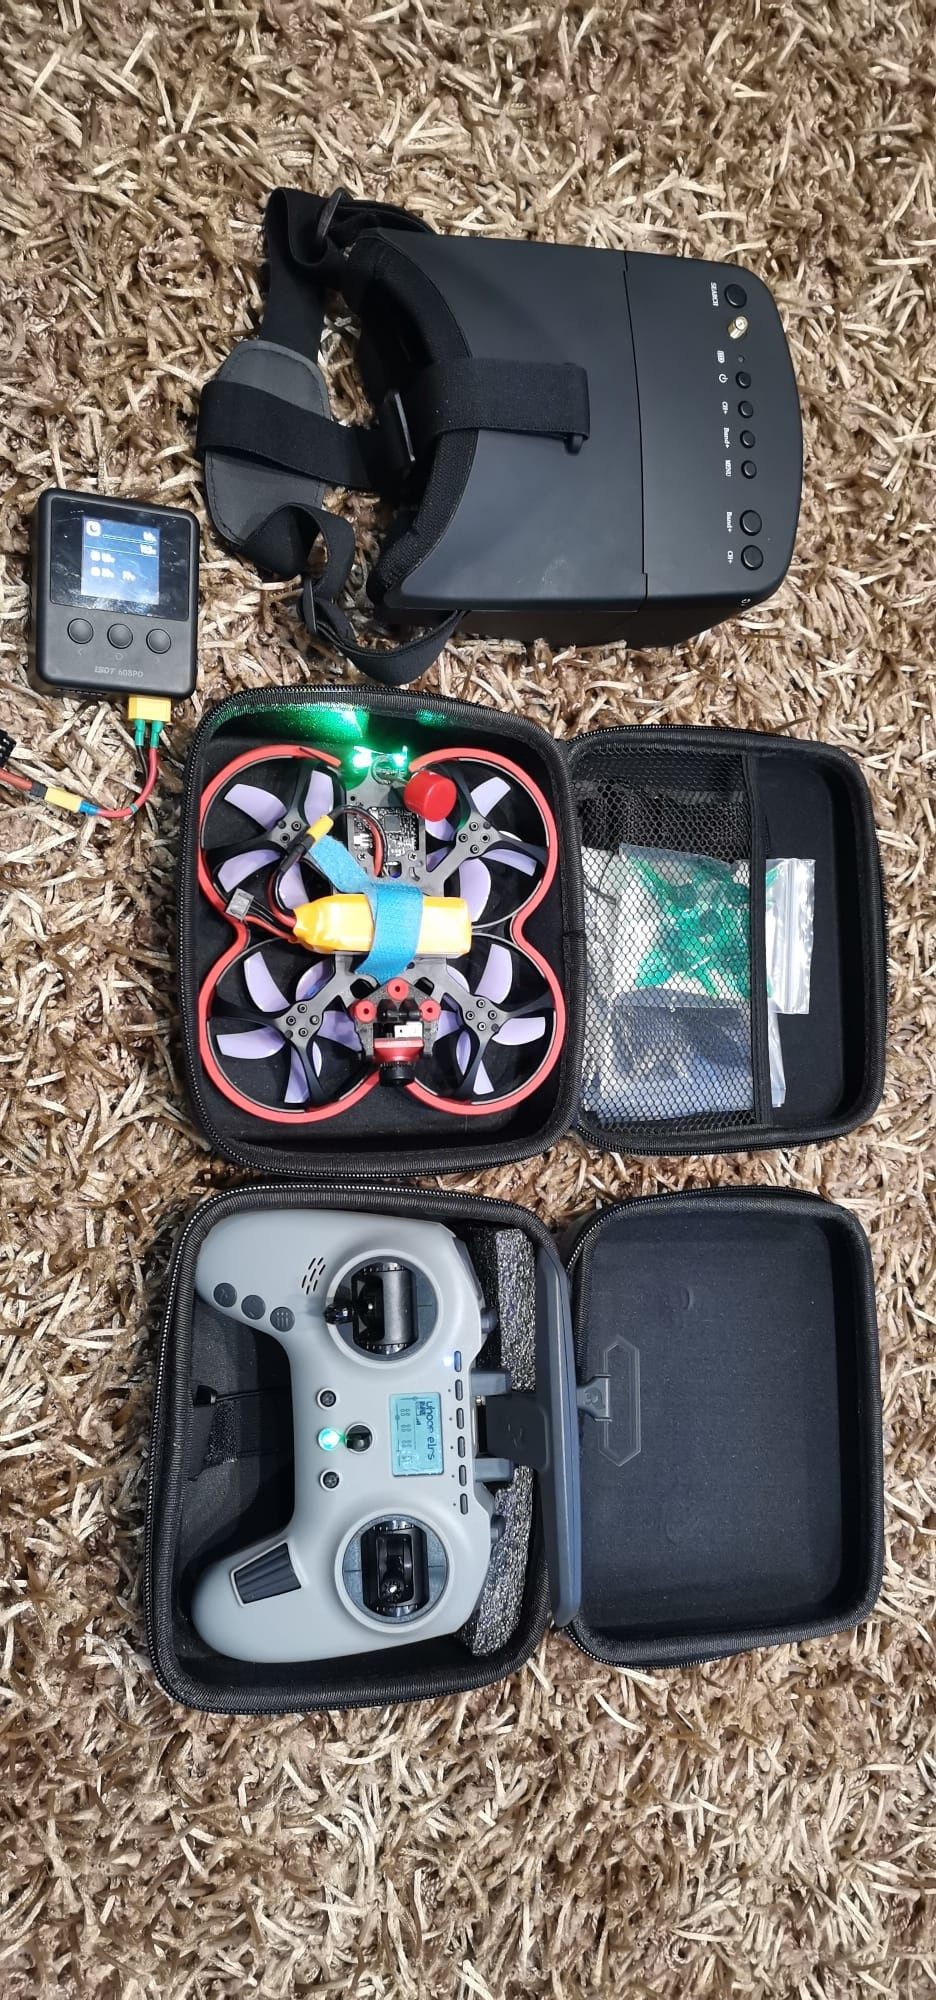 Drona fpv whoop, ready to fly